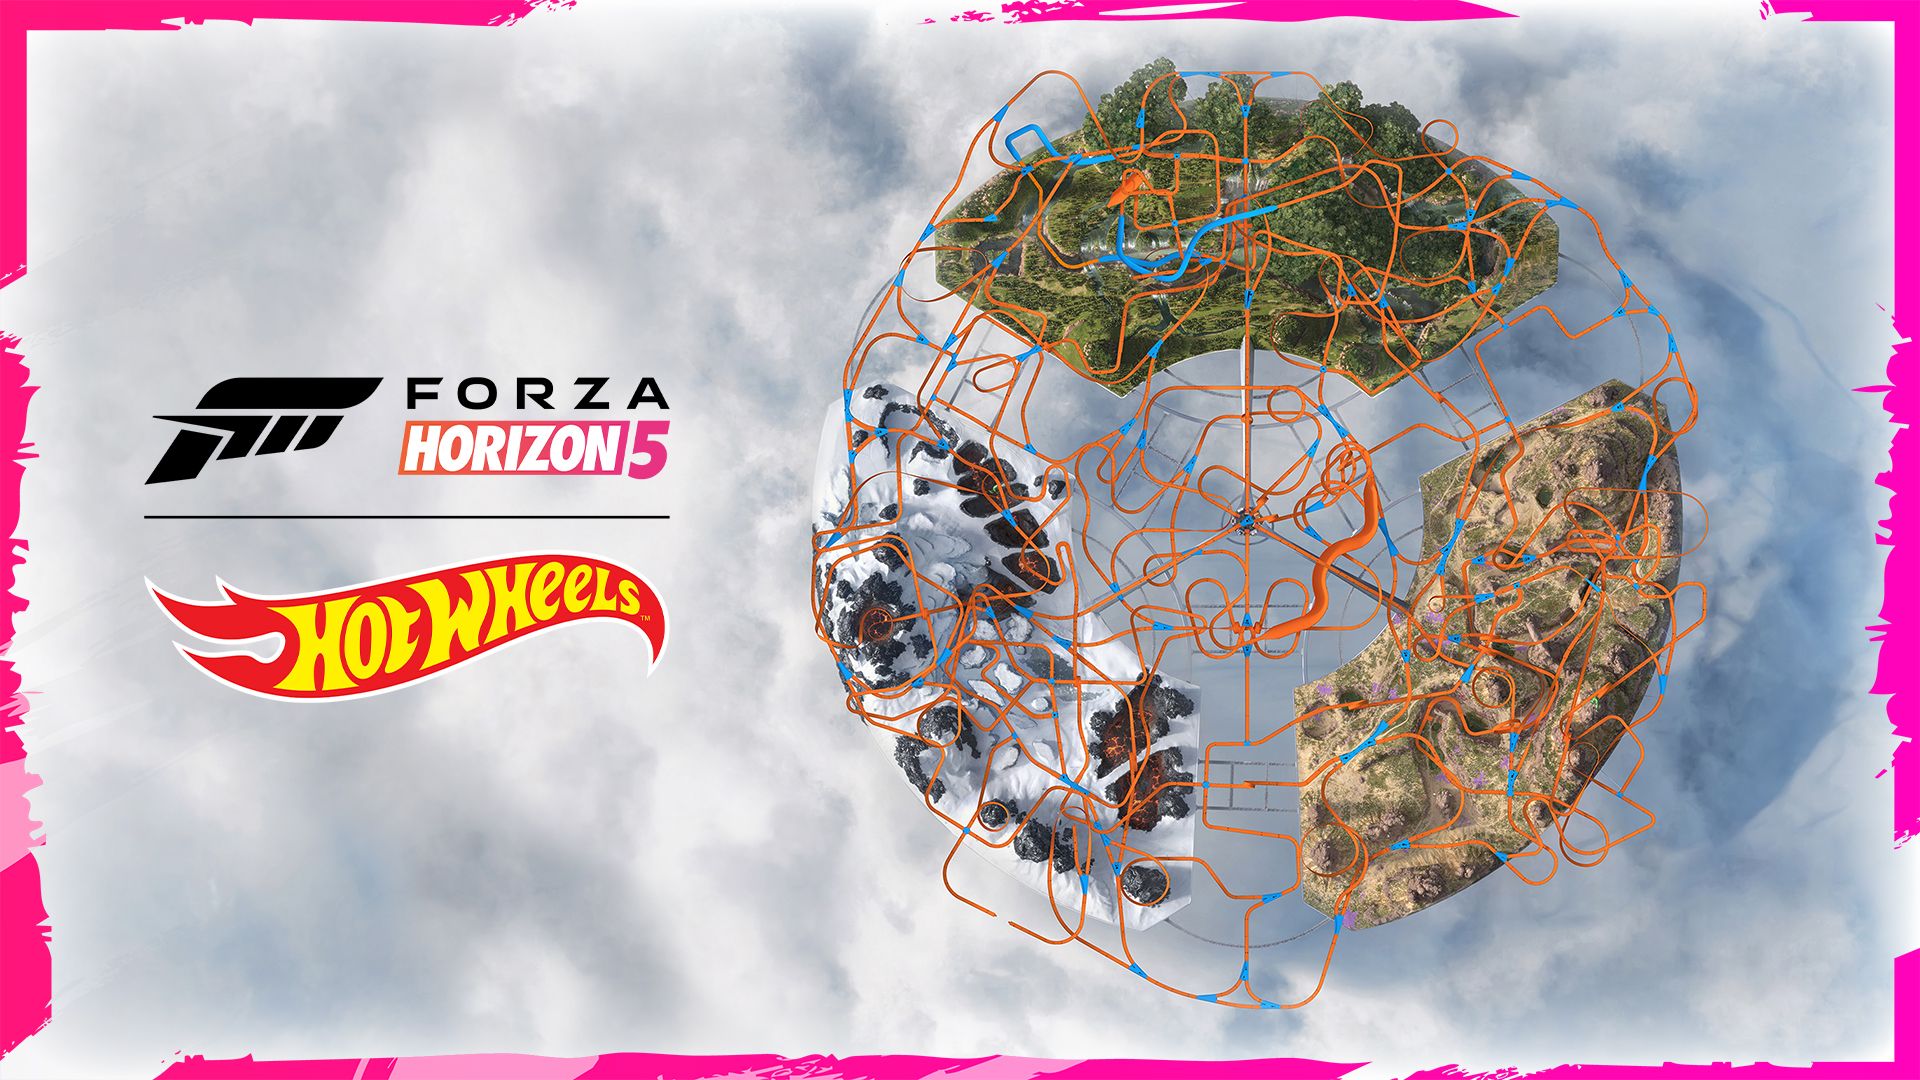 A top down view of the Forza Horizon 5: Hot Wheels game map featuring Forest Falls, Giant's Canyon and Ice Cauldron all interconnected via the Horizon Nexus.